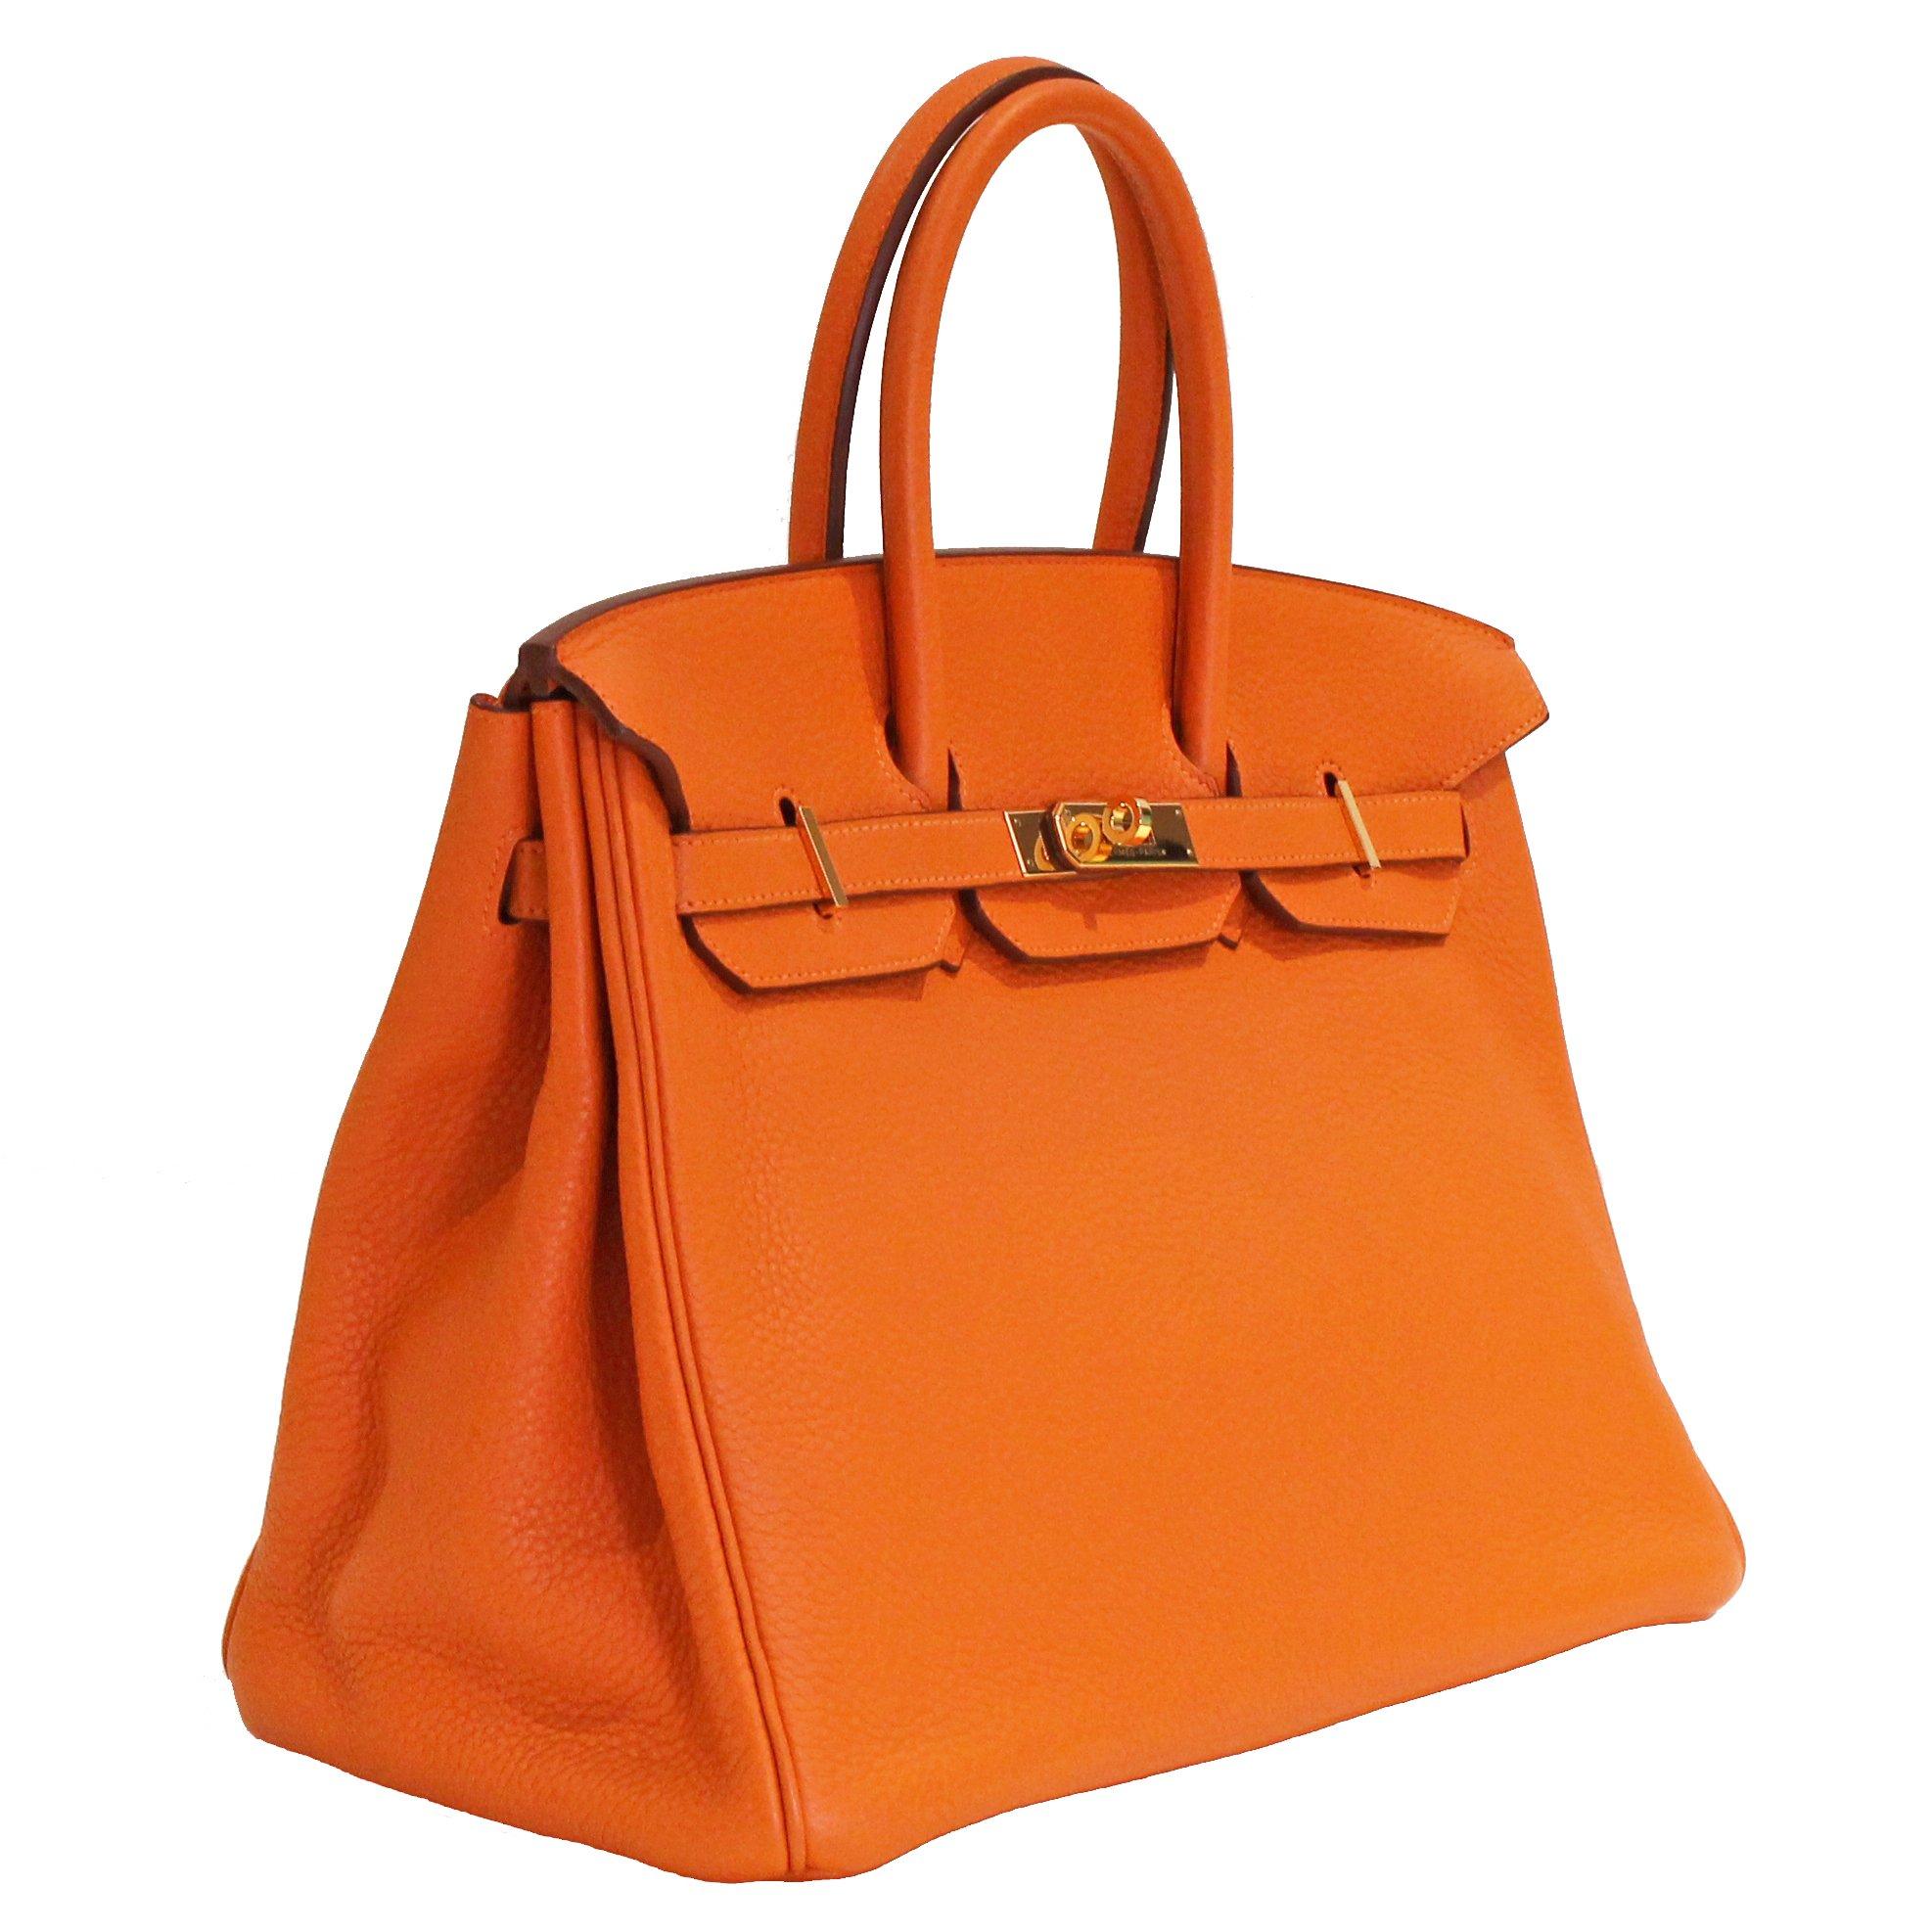 Birkin by Hermes from 2009
Orange Togo leather 
M Stamp (2009)
Gold hardware
Size: 35 cm
Key and lock tassel included inside
Comes with dust bag
Condition: Excellent